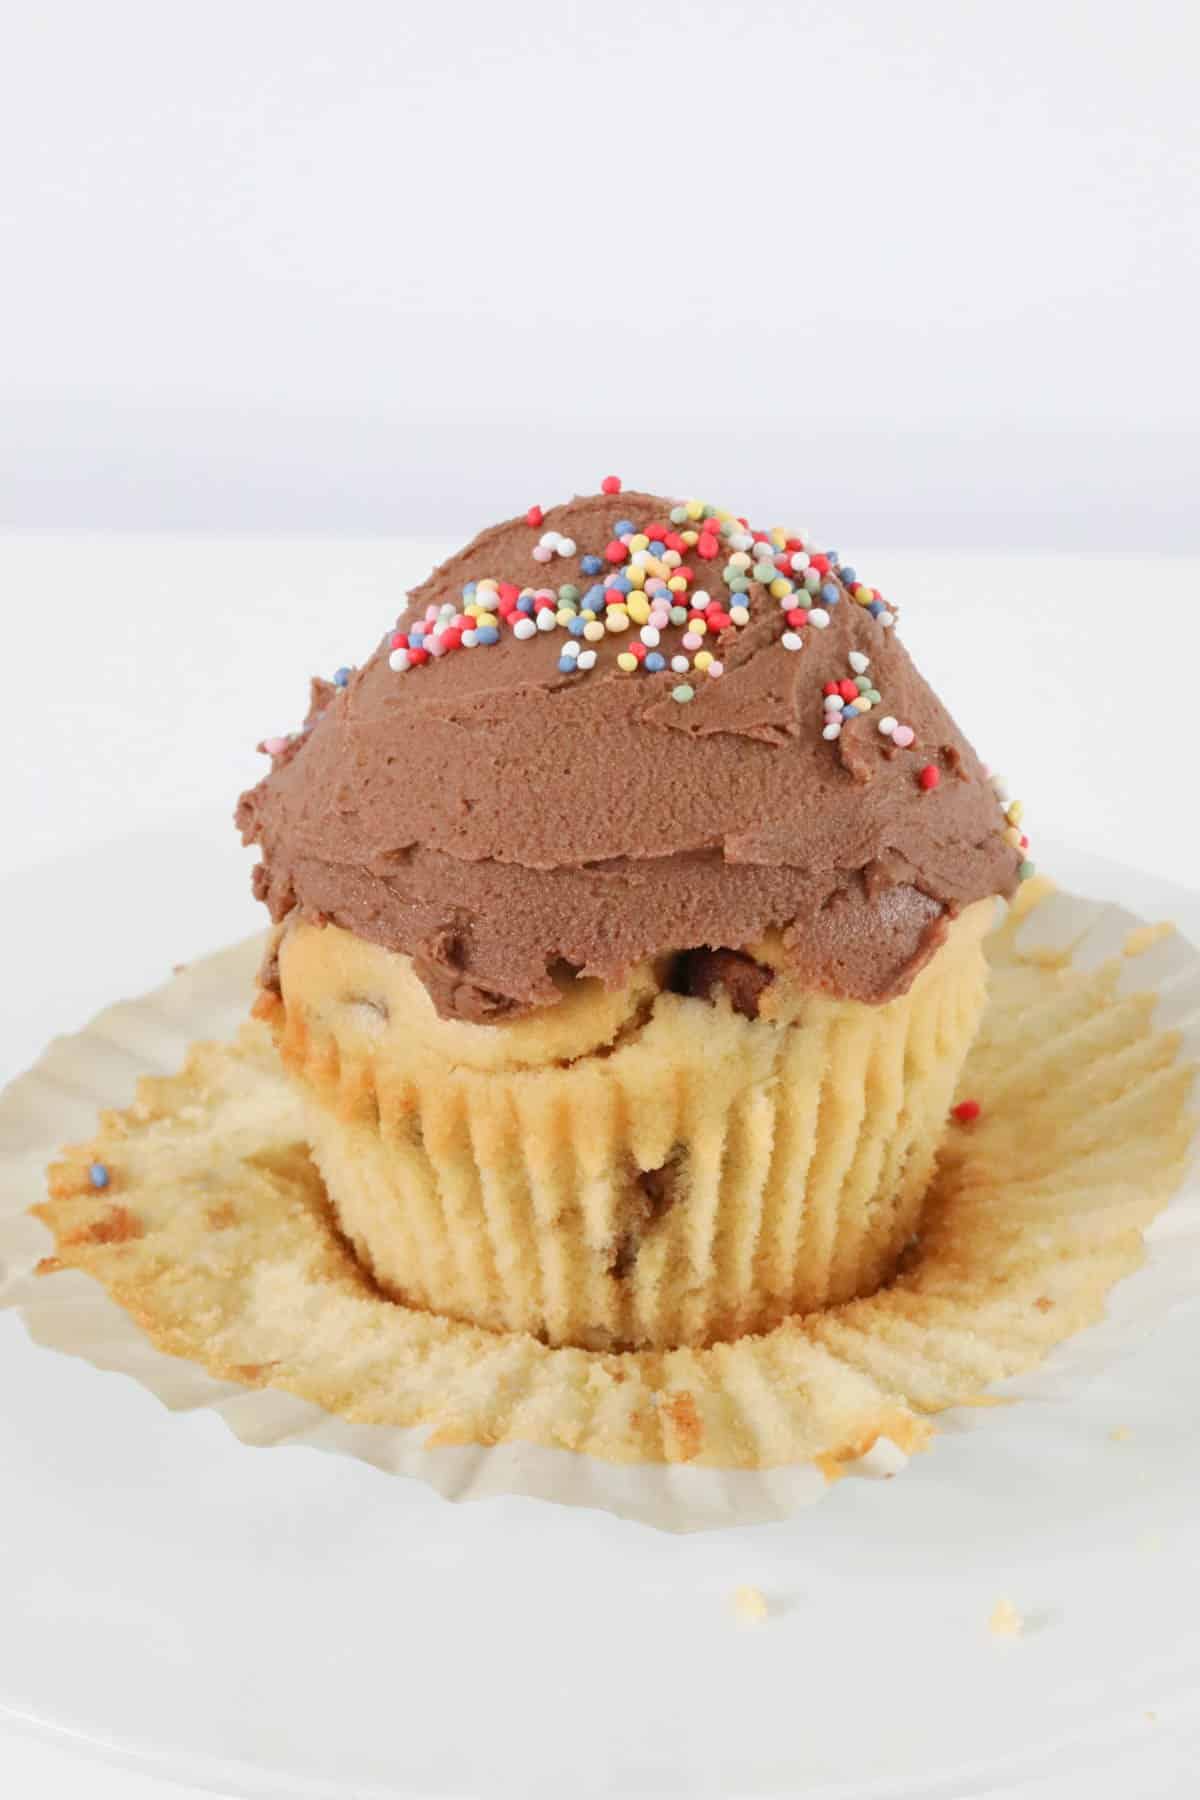 Chocolate frosting on a chocolate chip cupcake.